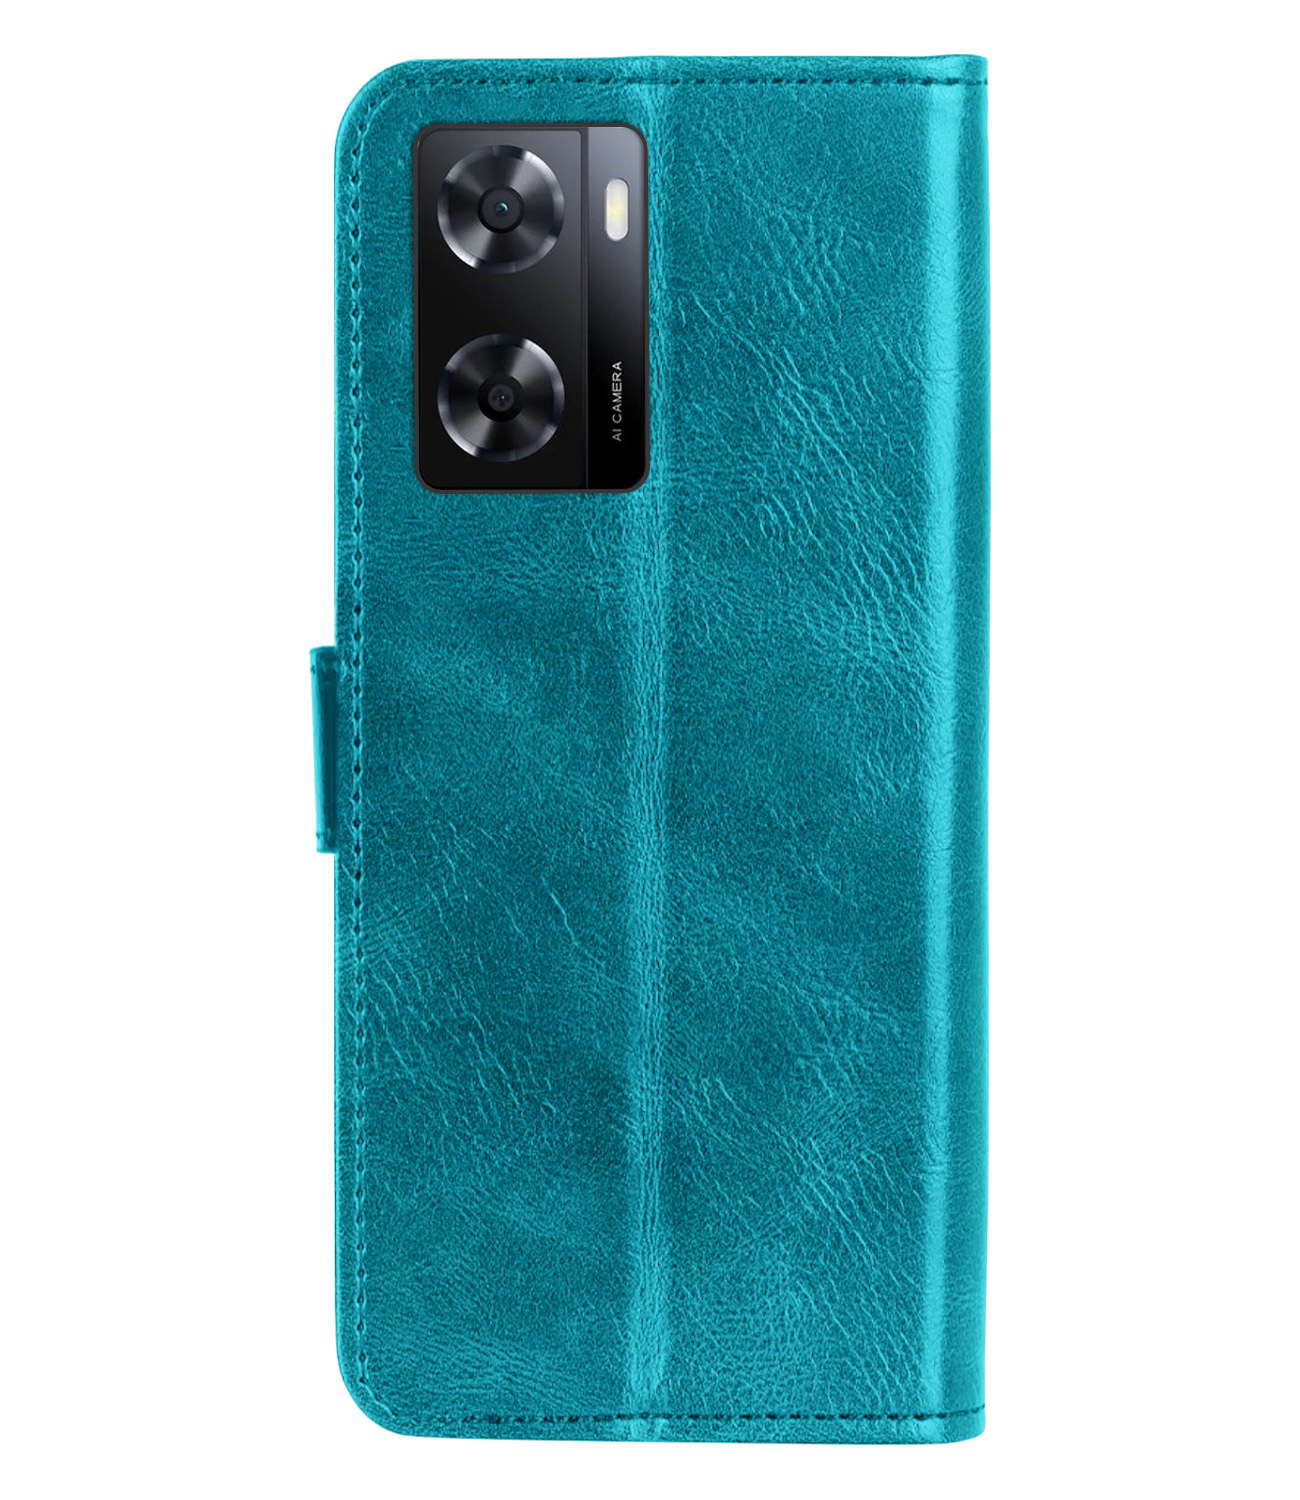 OPPO A57s Hoes Bookcase Flipcase Book Cover Met 2x Screenprotector - OPPO A57s Hoesje Book Case - Turquoise